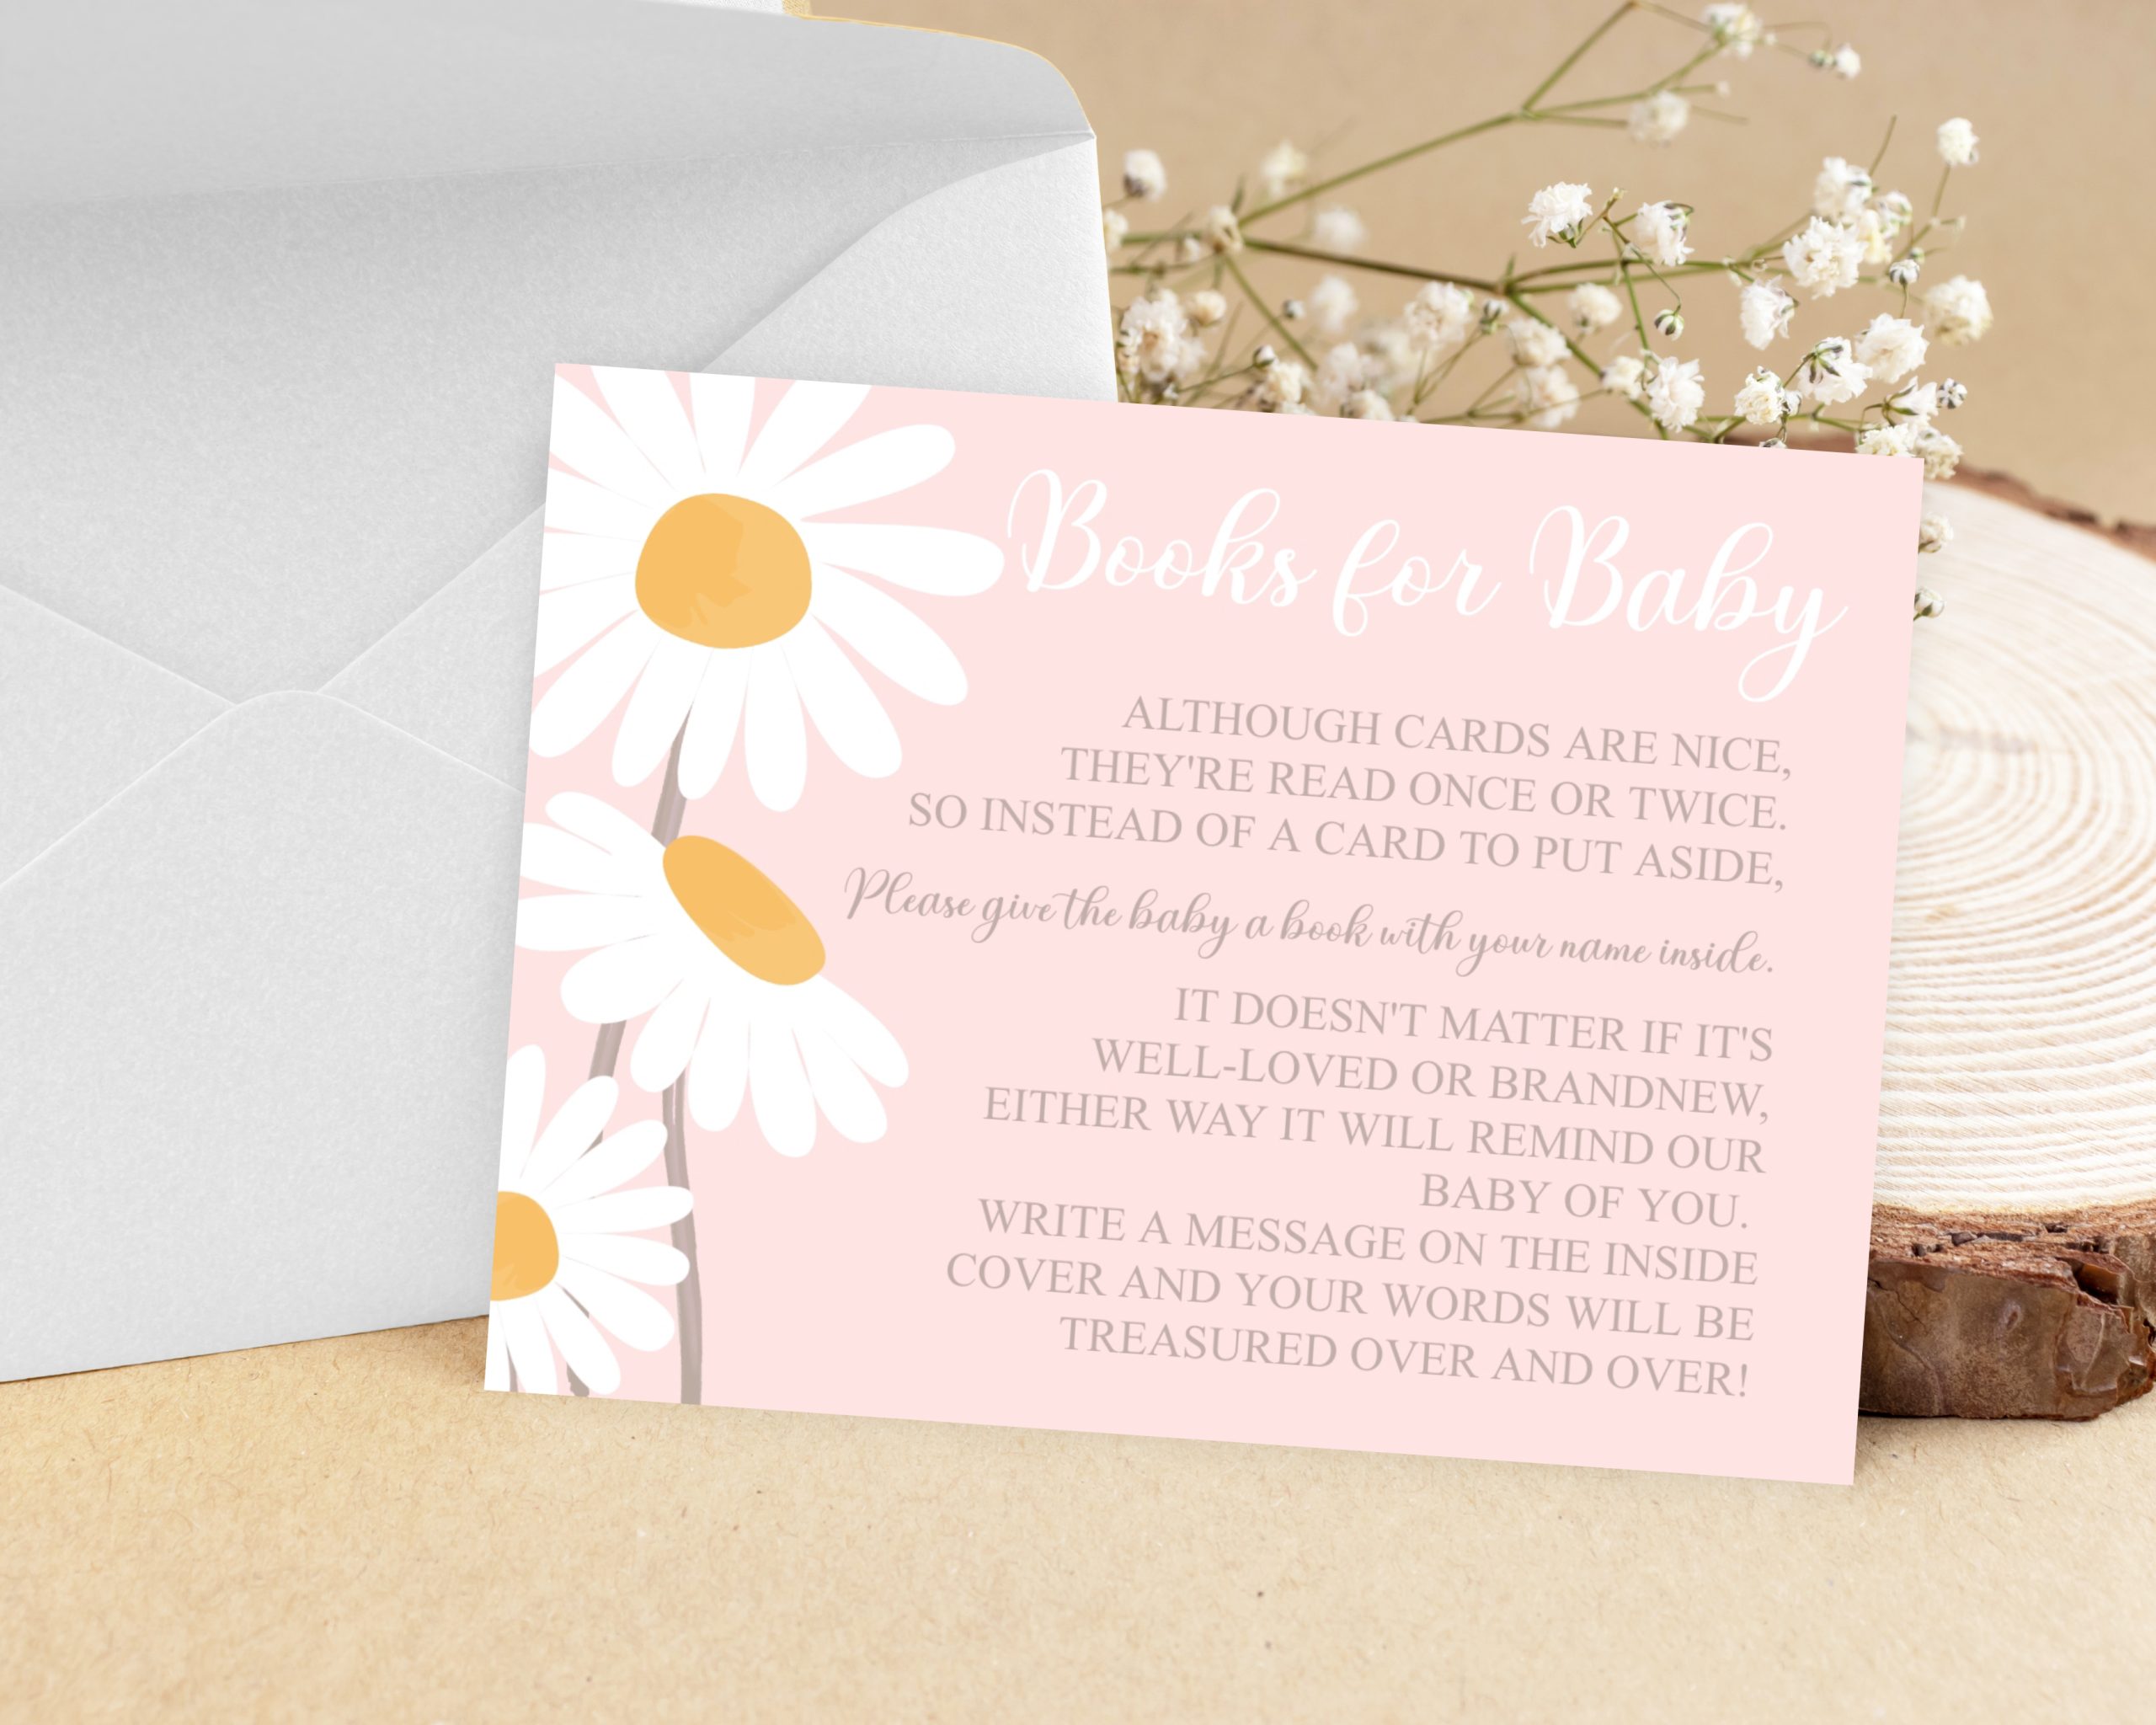 Baby Shower Invitation / Set Editable Daisy Baby Shower Invitation Set with Daisy Floral Design, Diaper Raffle, Thank You Card, and Books for Baby Card Baby Shower Diaper Raffle Card